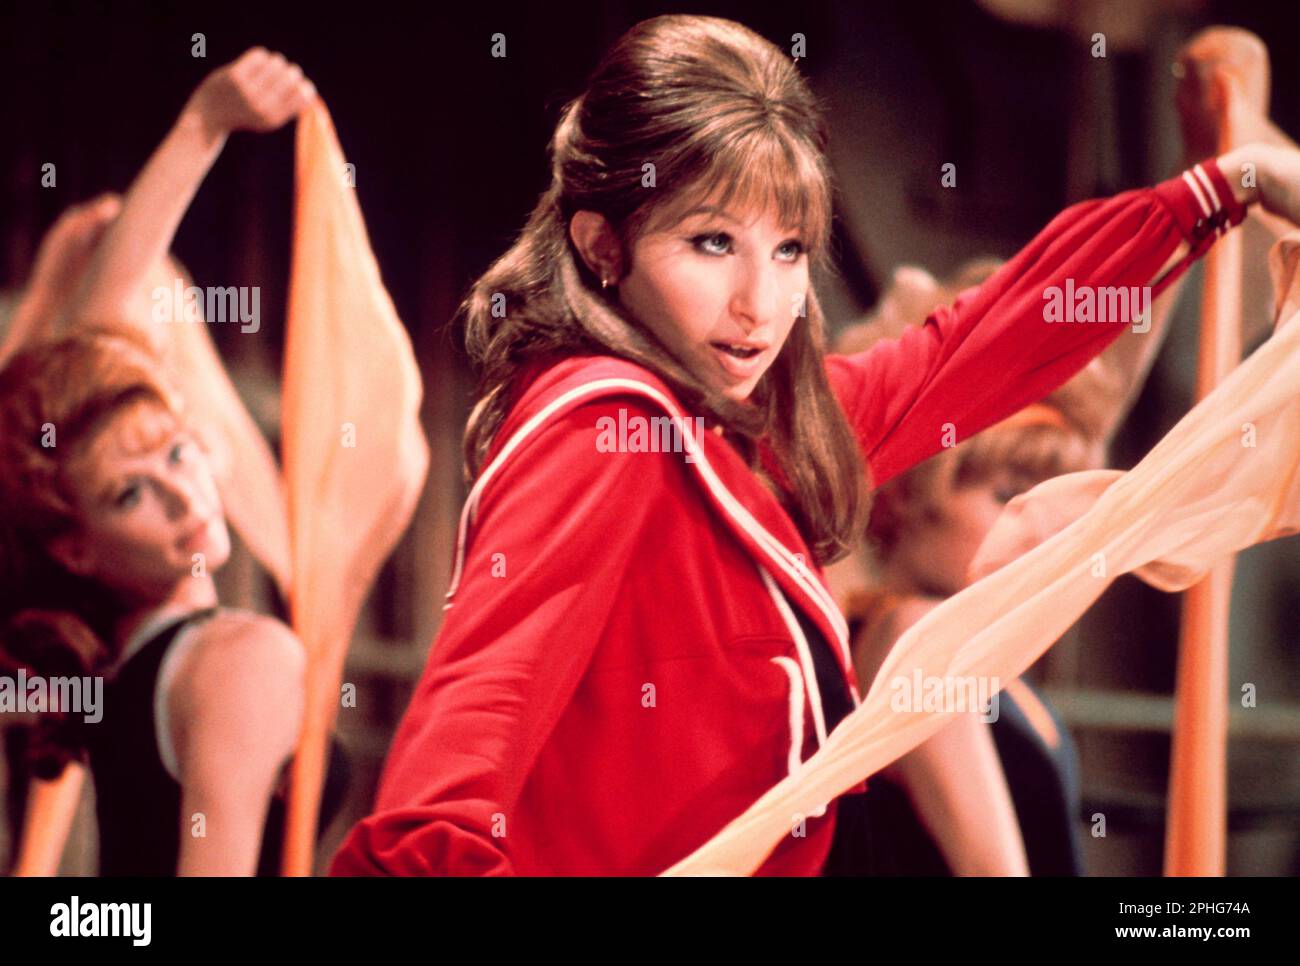 BARBRA STREISAND in FUNNY GIRL (1968), directed by WILLIAM WYLER. Credit: COLUMBIA PICTURES / Album Stock Photo